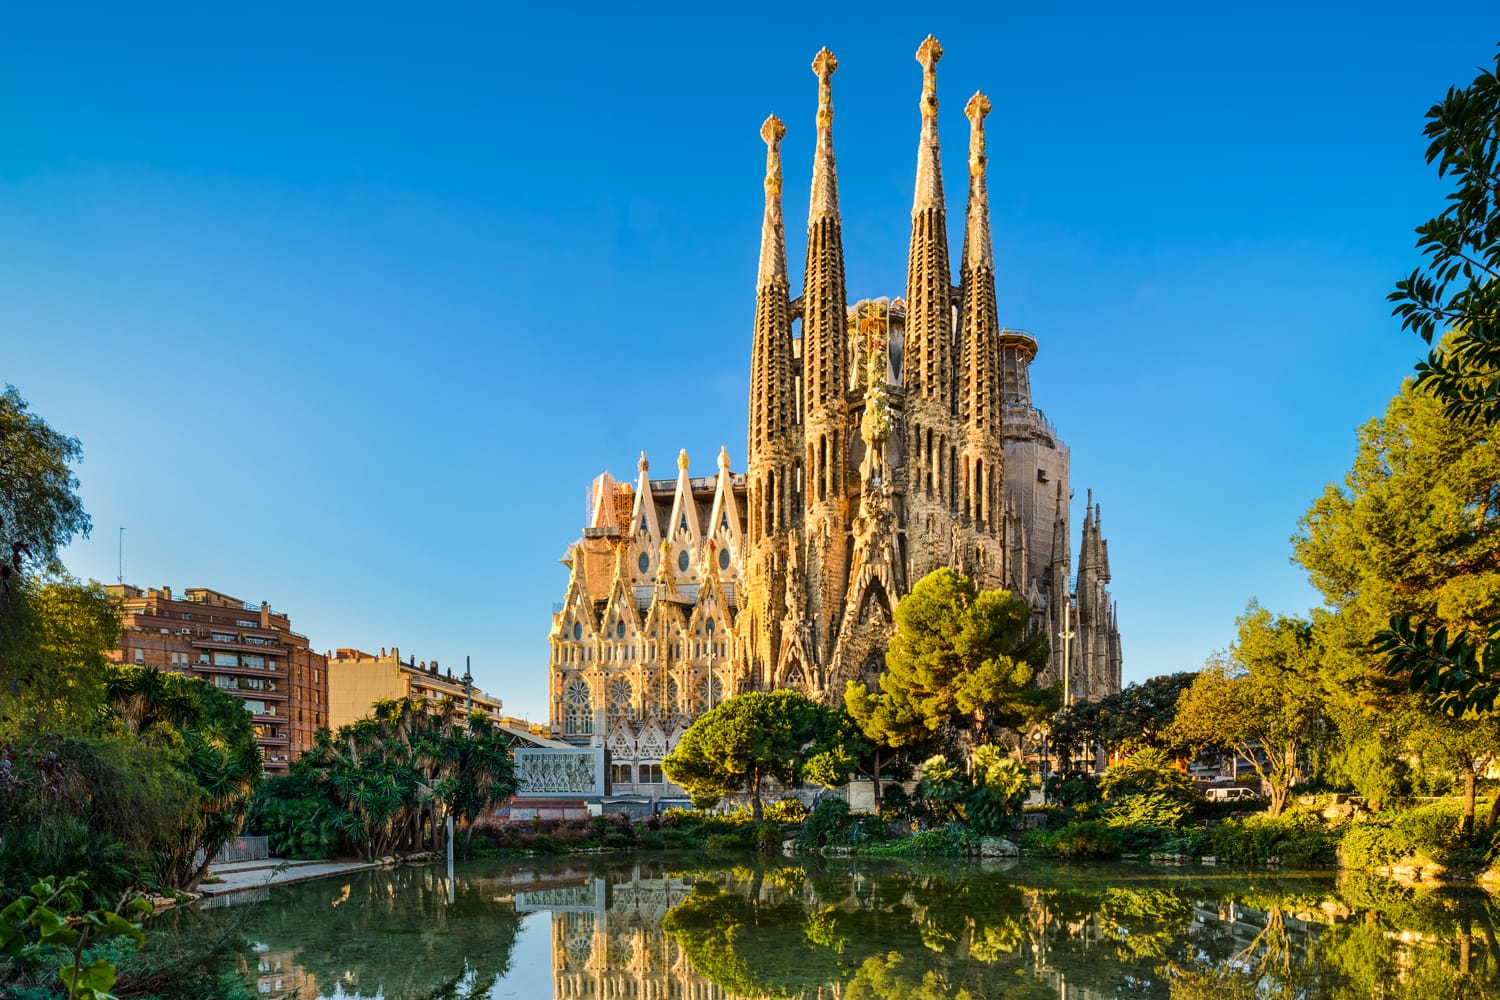 Sagrada Familia in Barcelona, Spain. This impressive cathedral was originally designed by Antoni Gaudi is still being built since 1882.